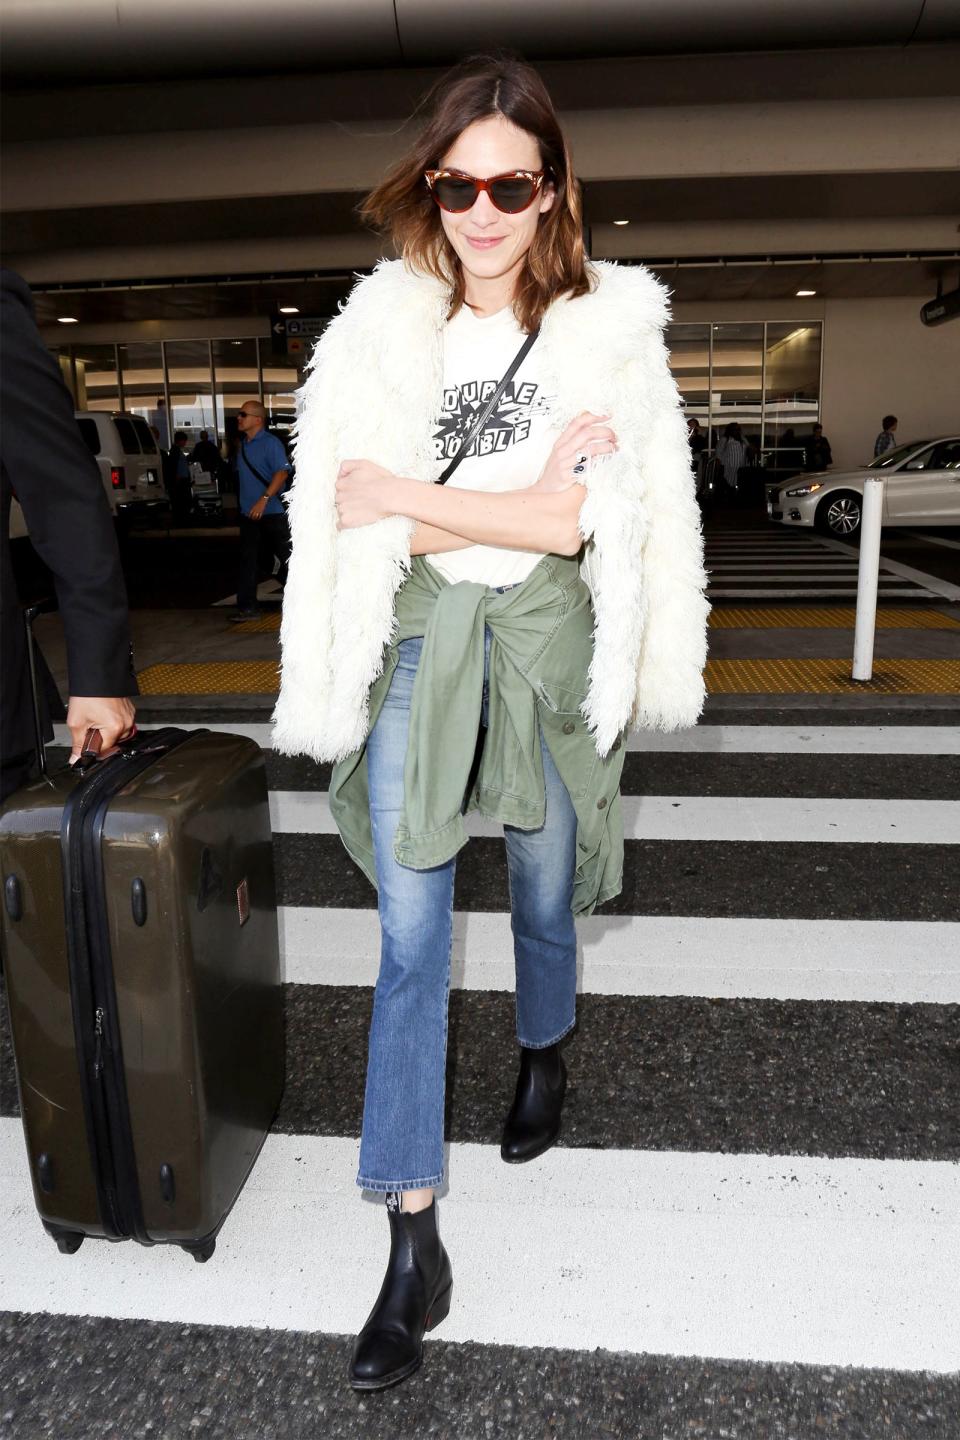 Alexa Chung's cuddly coat is more than a chic outer layer: It can double as a soft pillow on the plane.